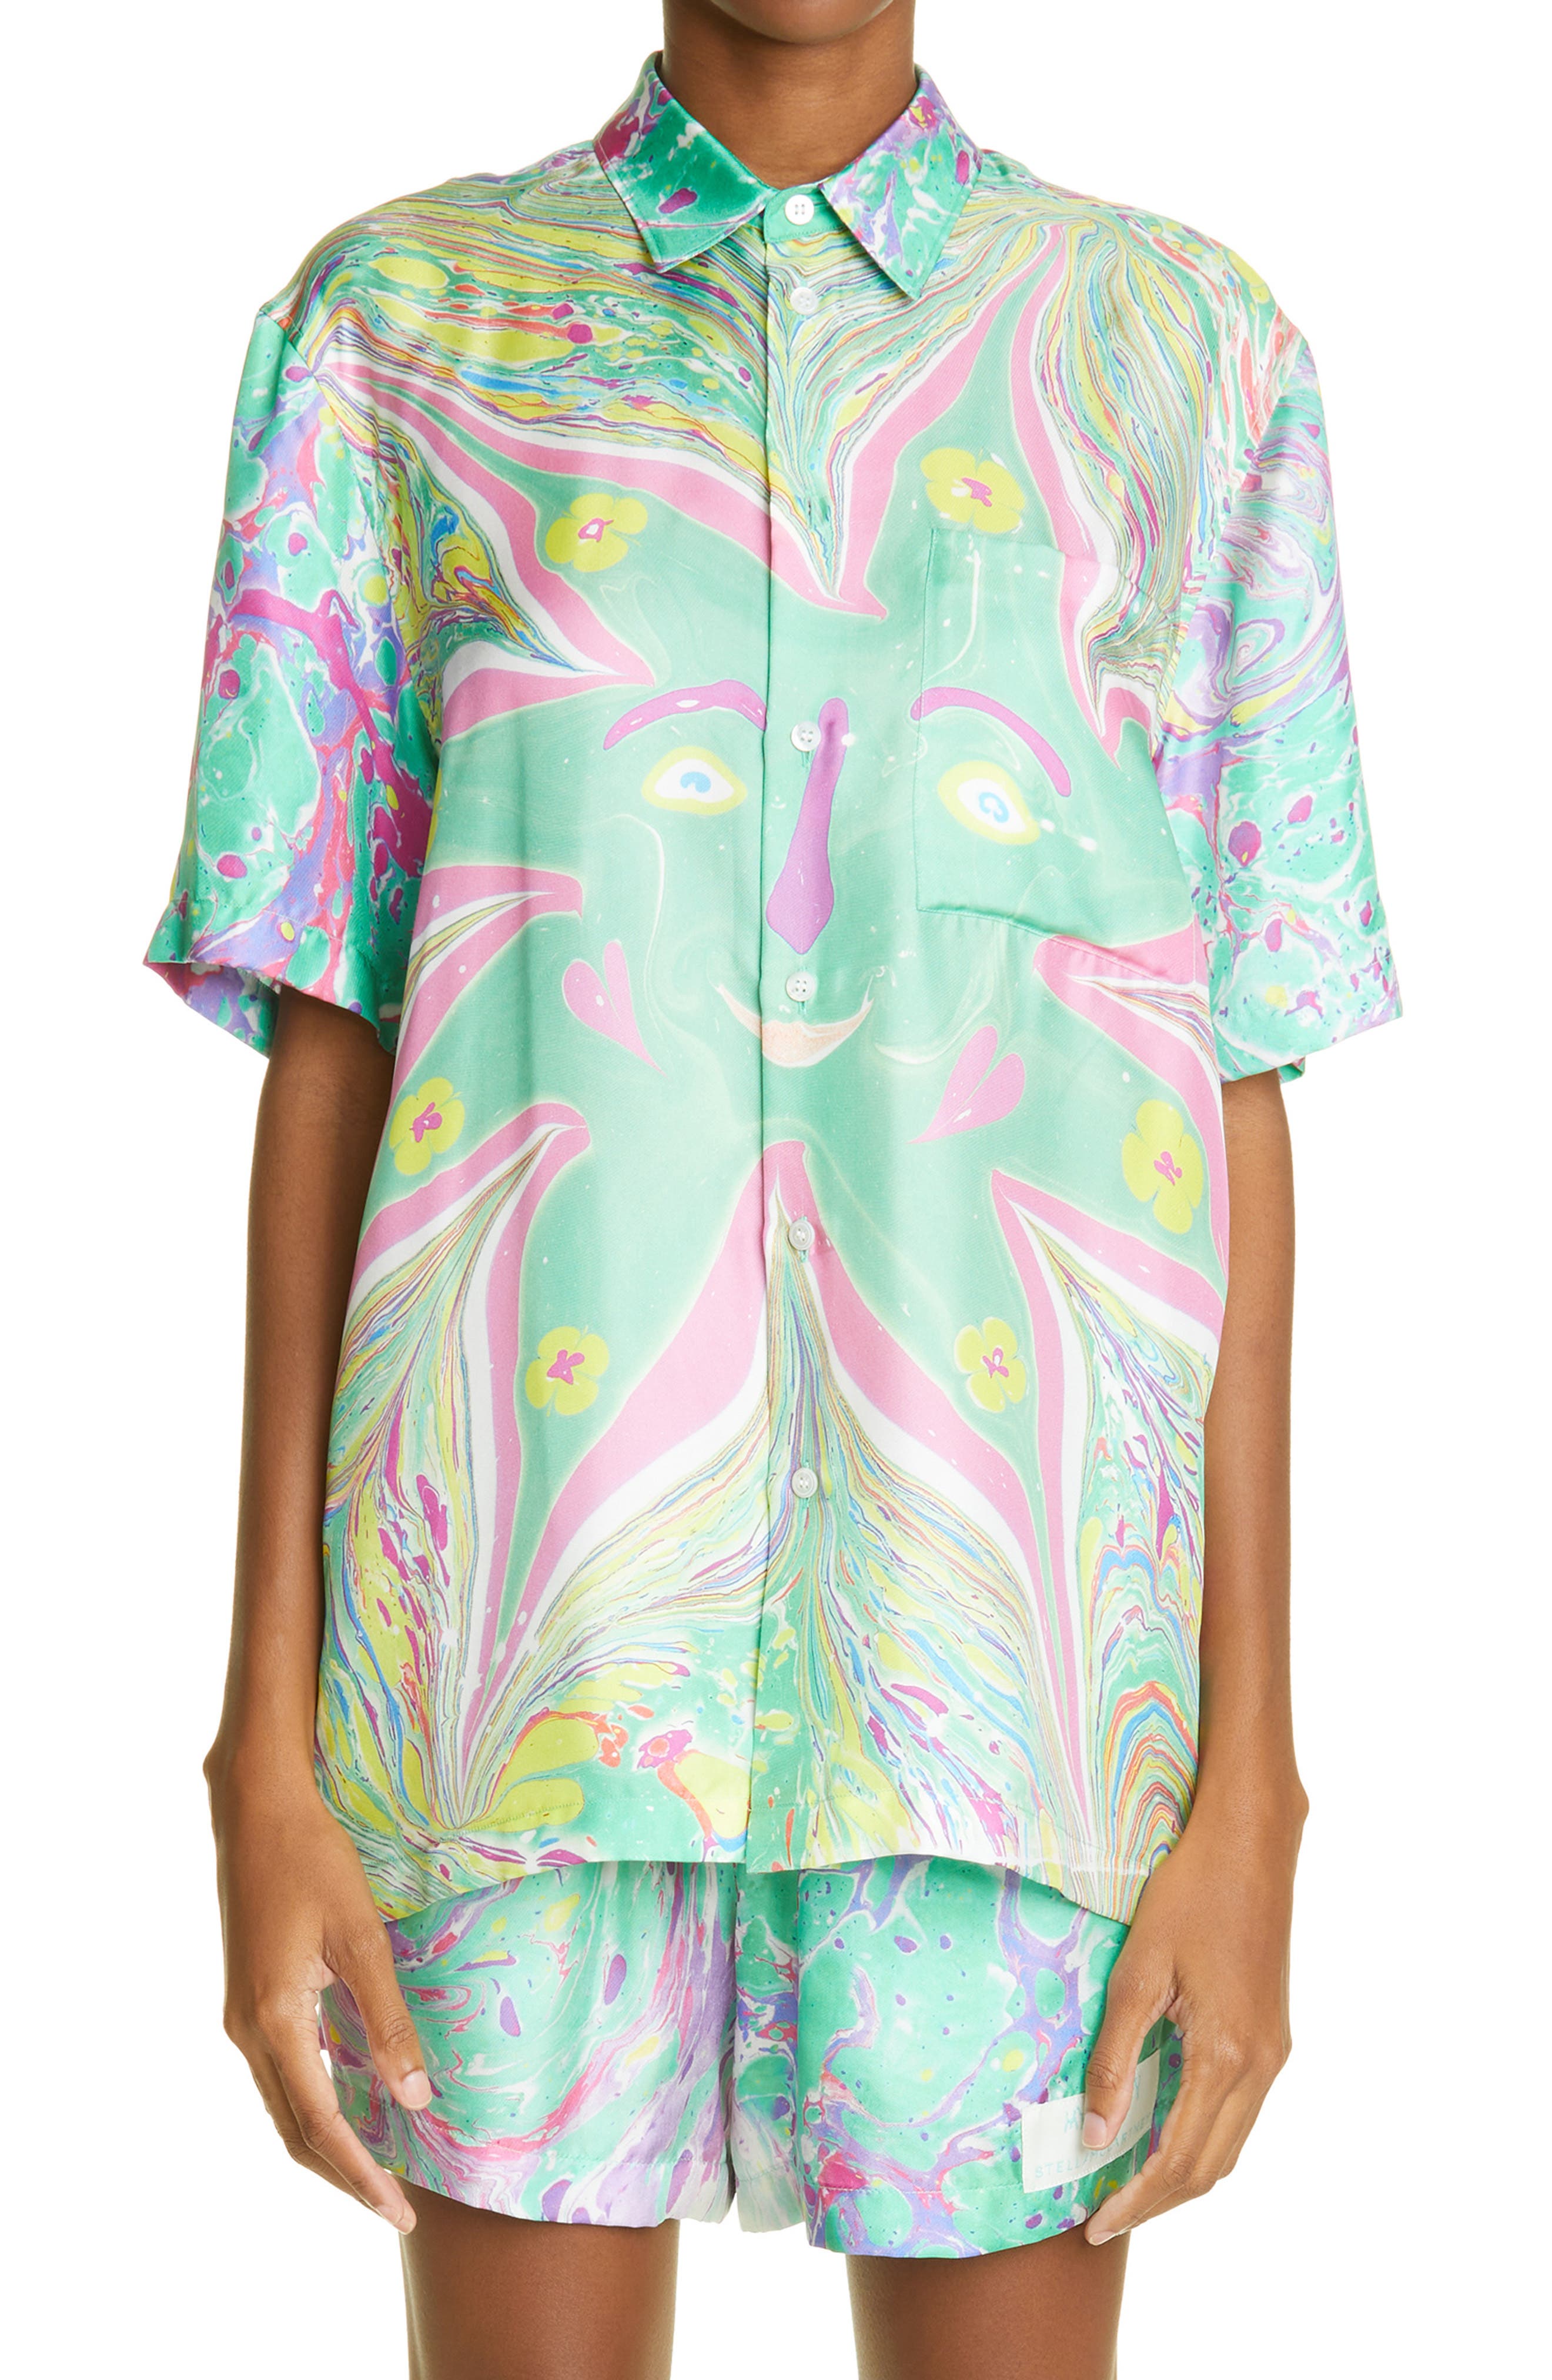 Stella McCartney x Myfawnwy Unisex Shared 3 Ricky Marble Print Silk Button-Up Shirt in Multicolor at Nordstrom